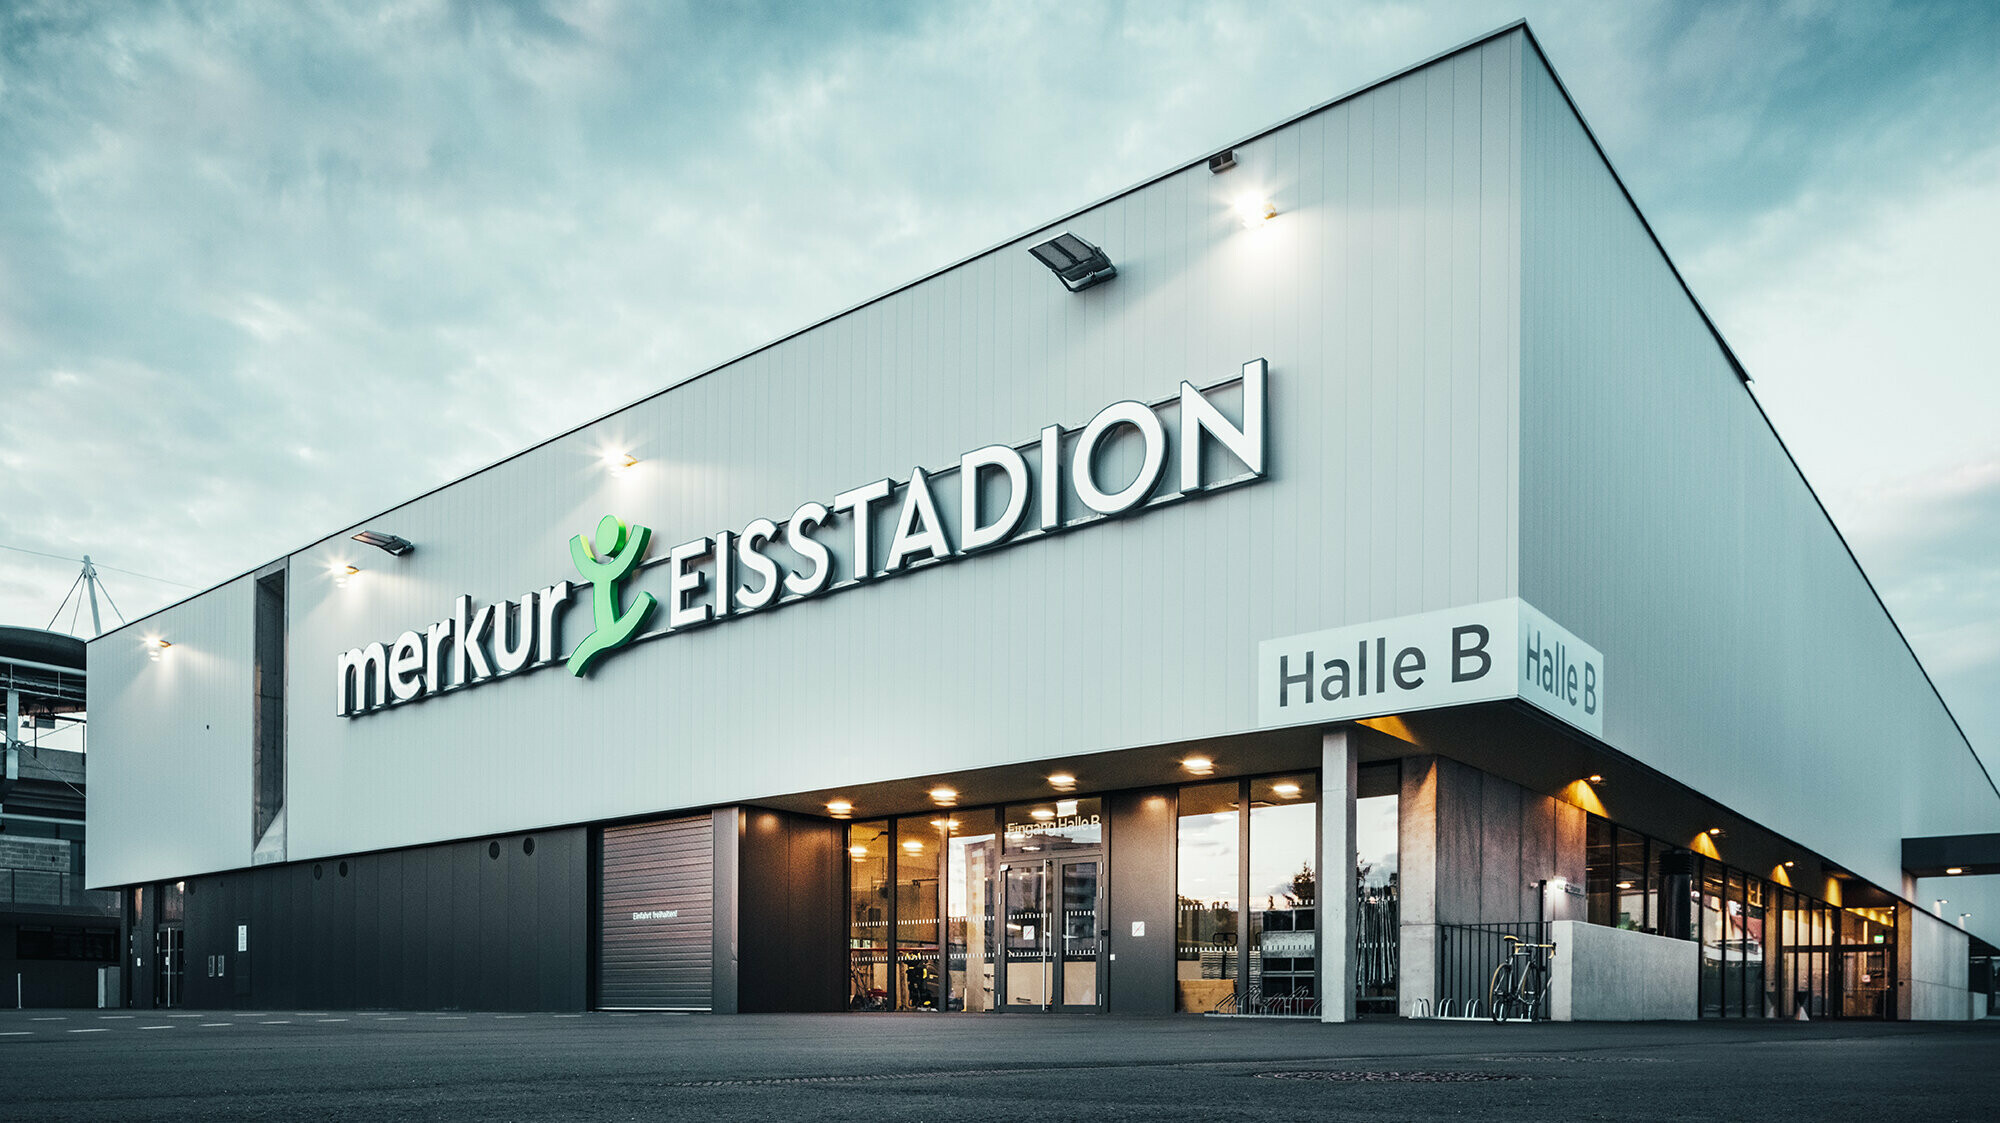 Fron view of the ice rink with the inscription "merkur EISSTADION".